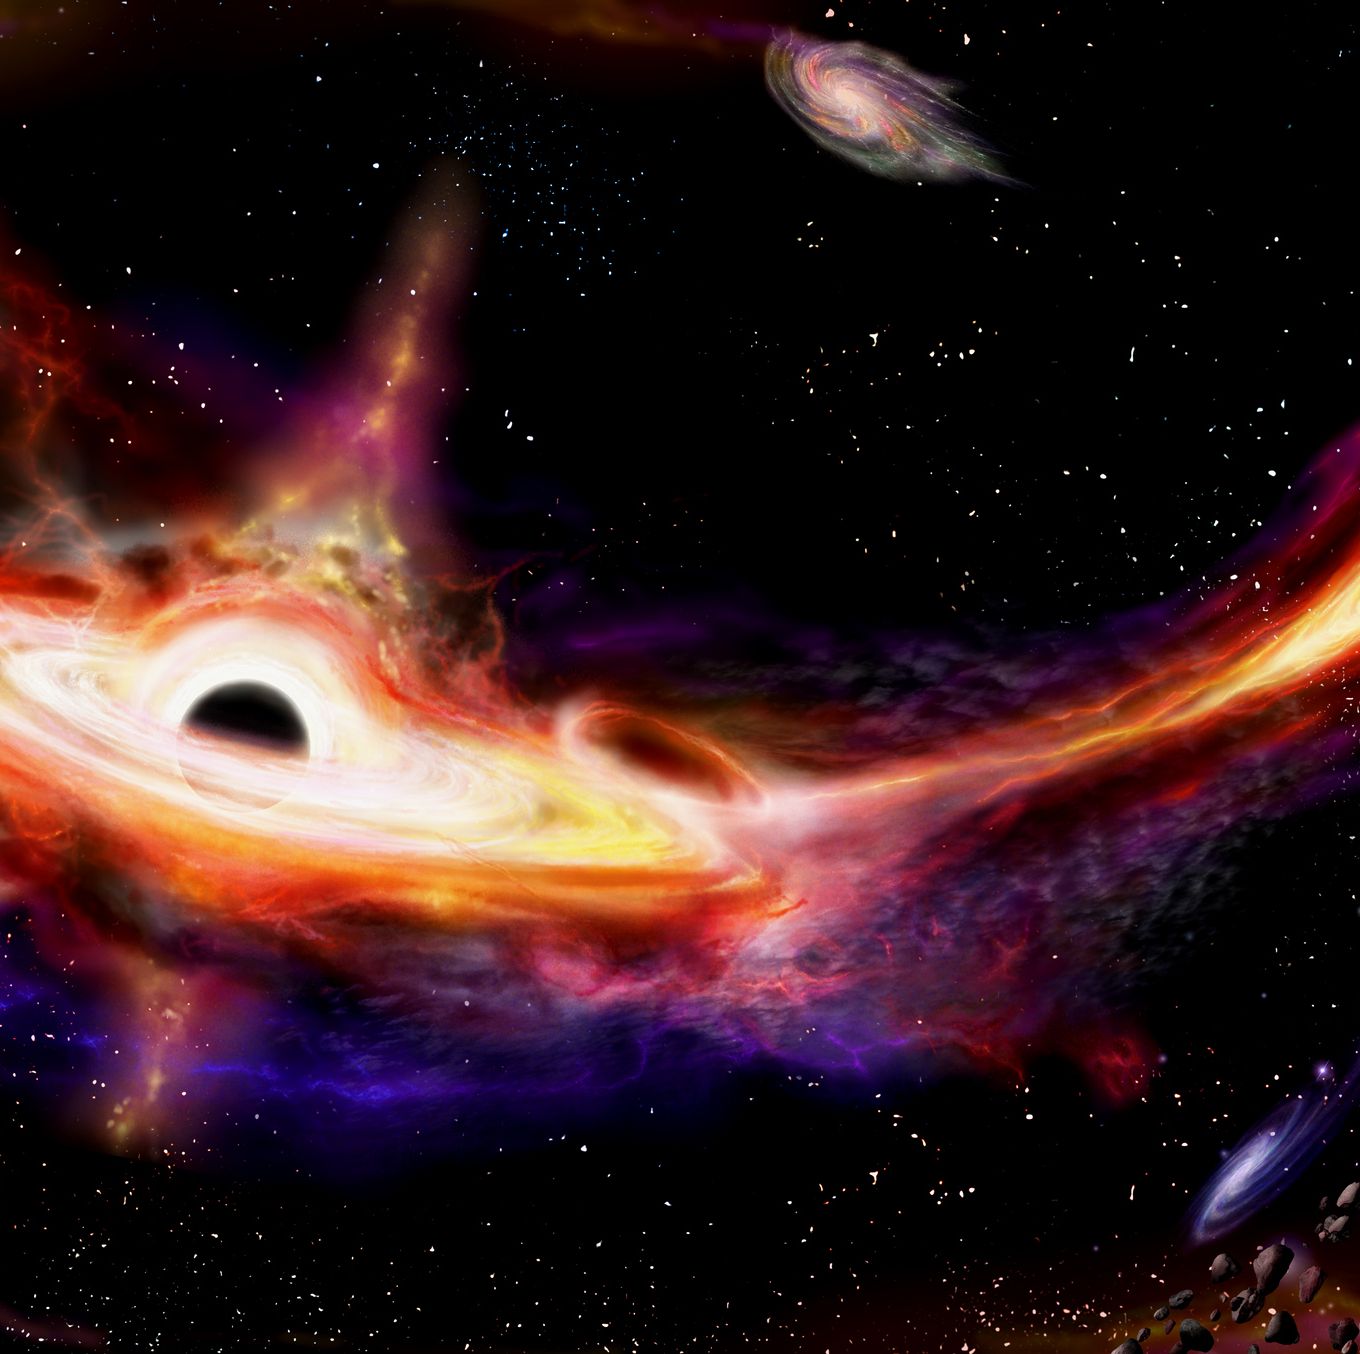 Two Supermassive Black Holes Near Earth Are Merging Into a 'Monster'